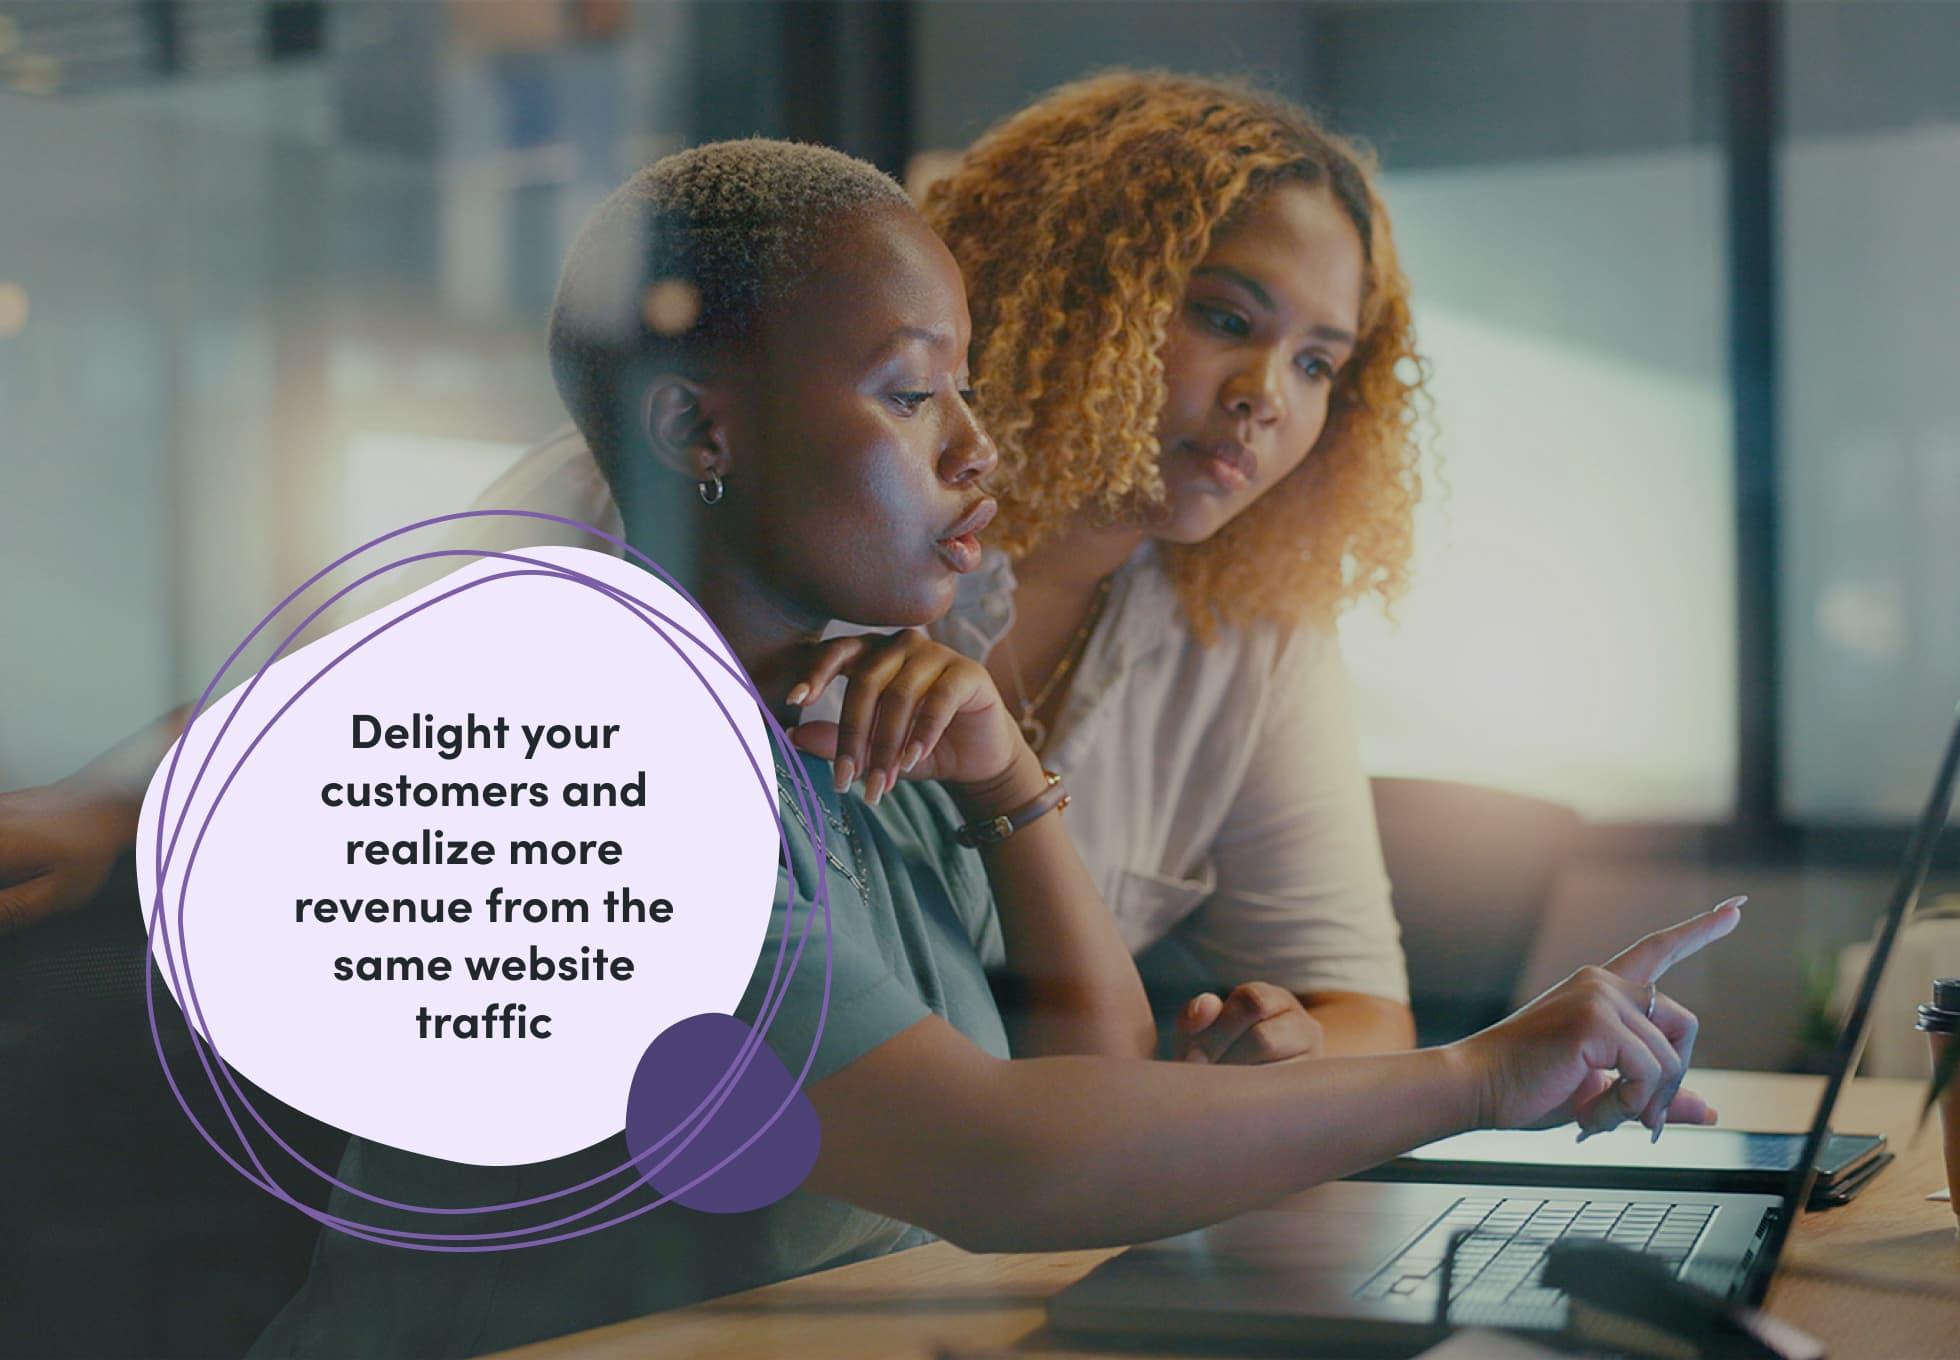 Two coworkers looking at a laptop screen. Overtop of the image says,"Delight your customers and realize more revenue from the same website traffic."